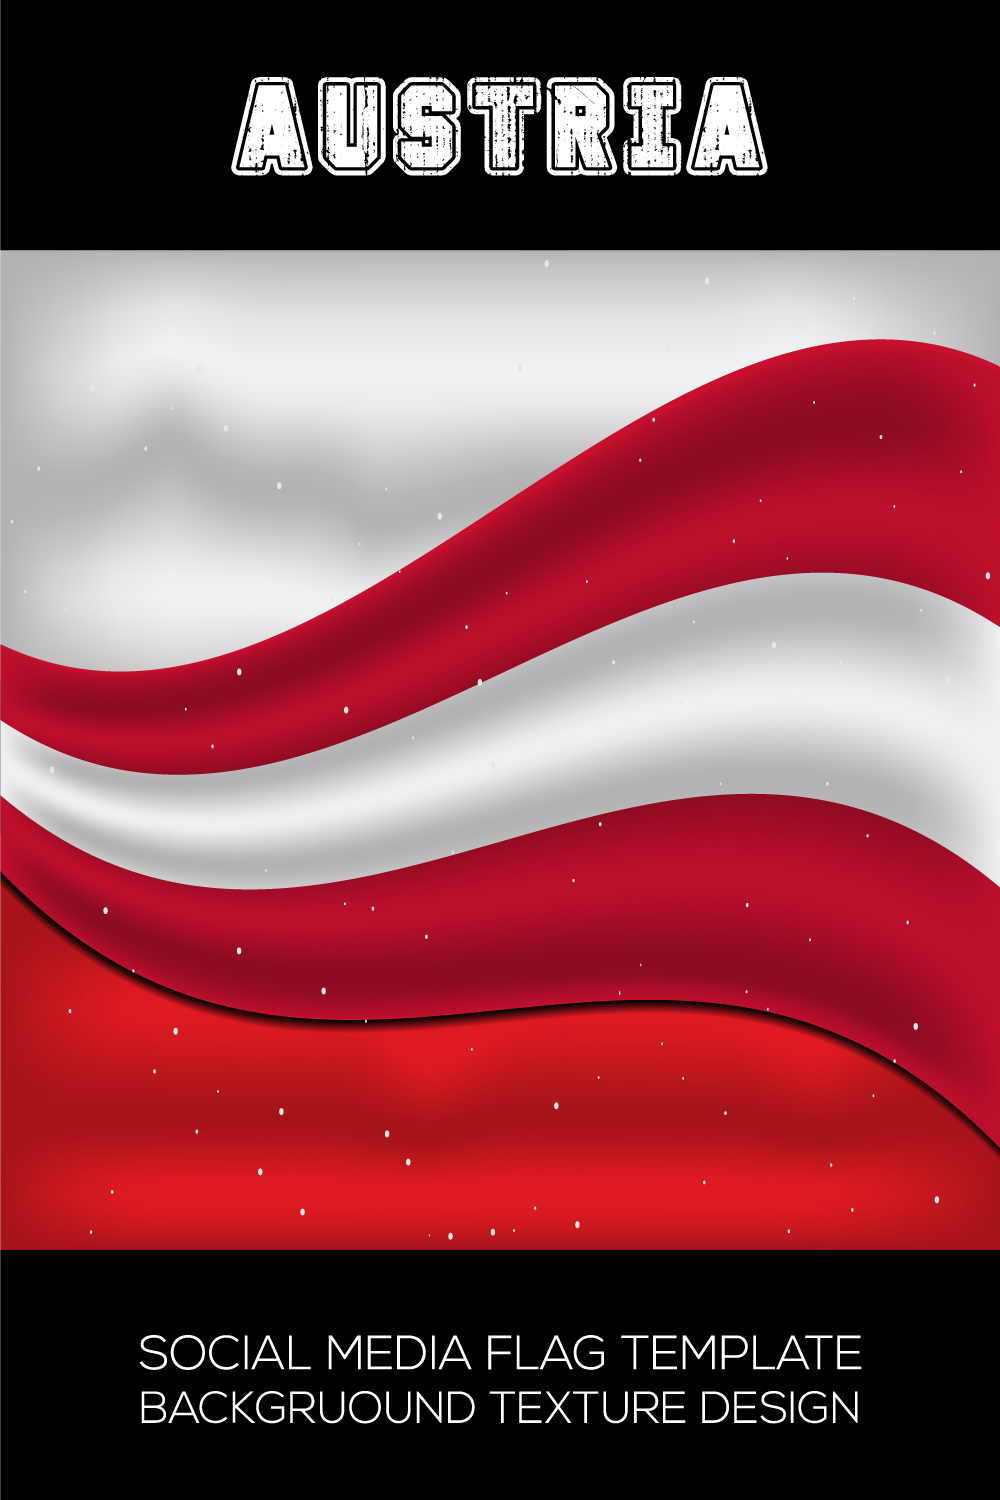 Charming image of the flag of Austria.